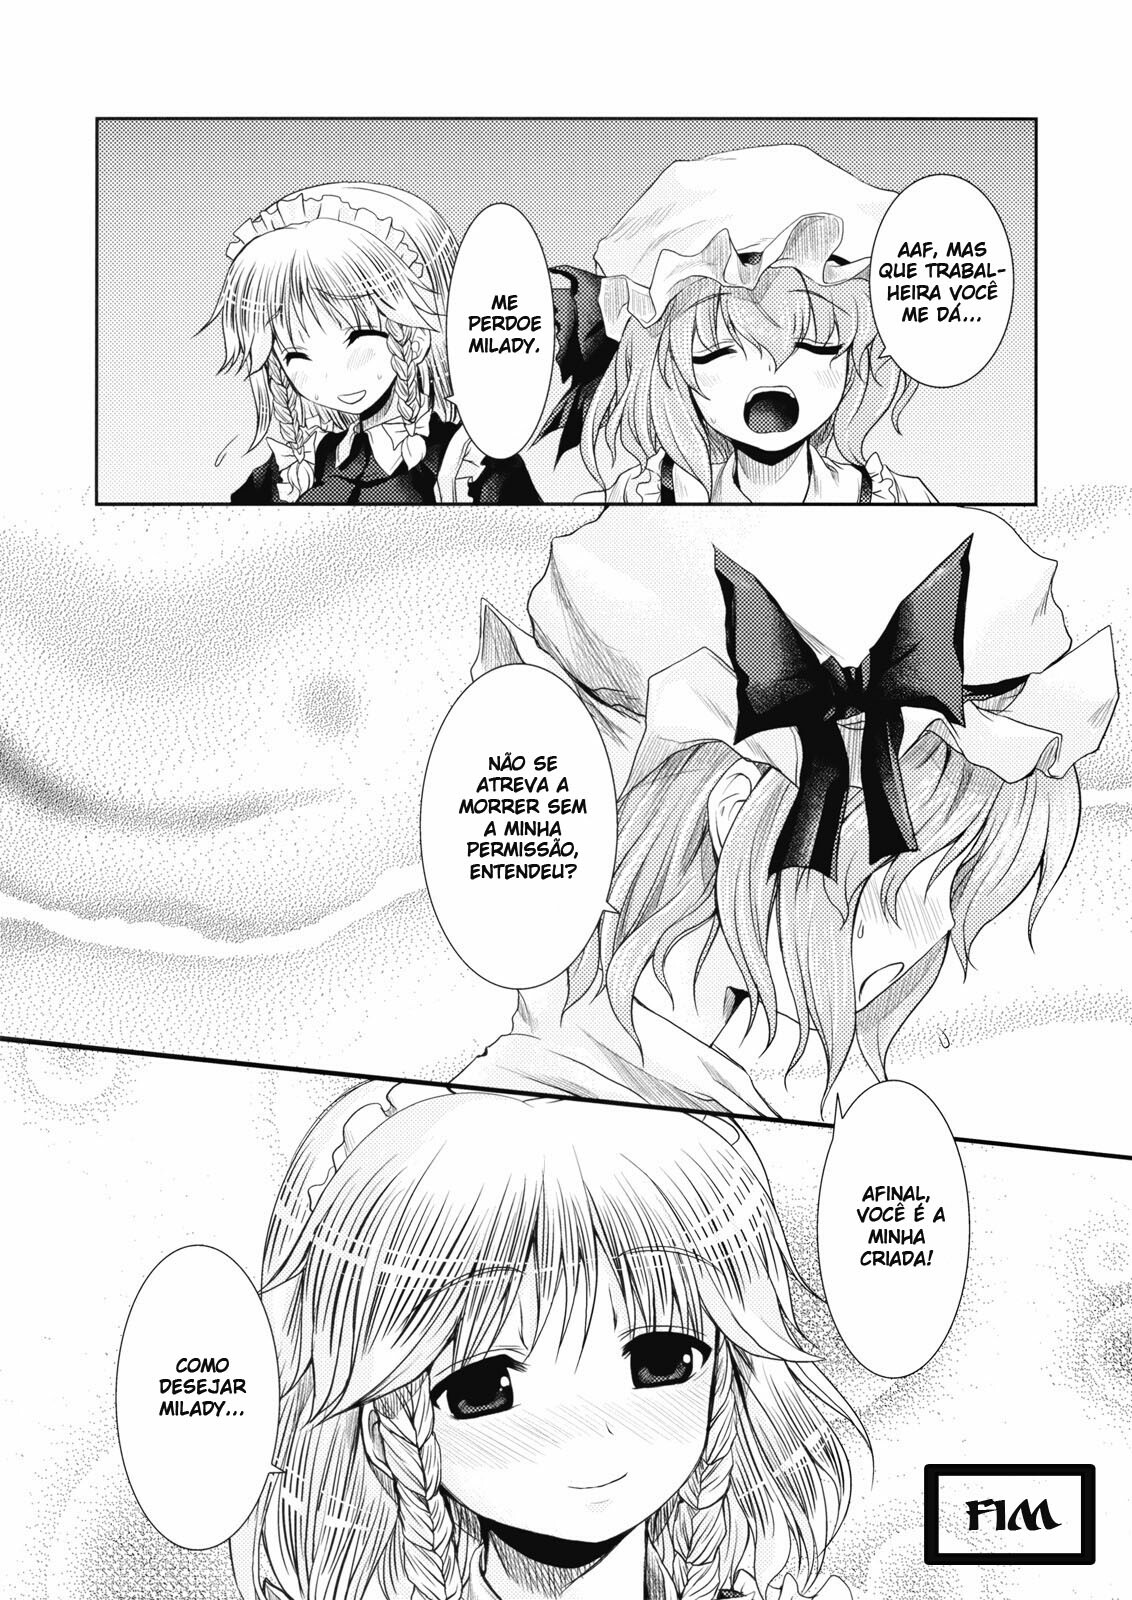 (ComiComi13) [Memoria (Tilm)] Bloody Blood (Touhou Project) [Portuguese-BR] page 9 full